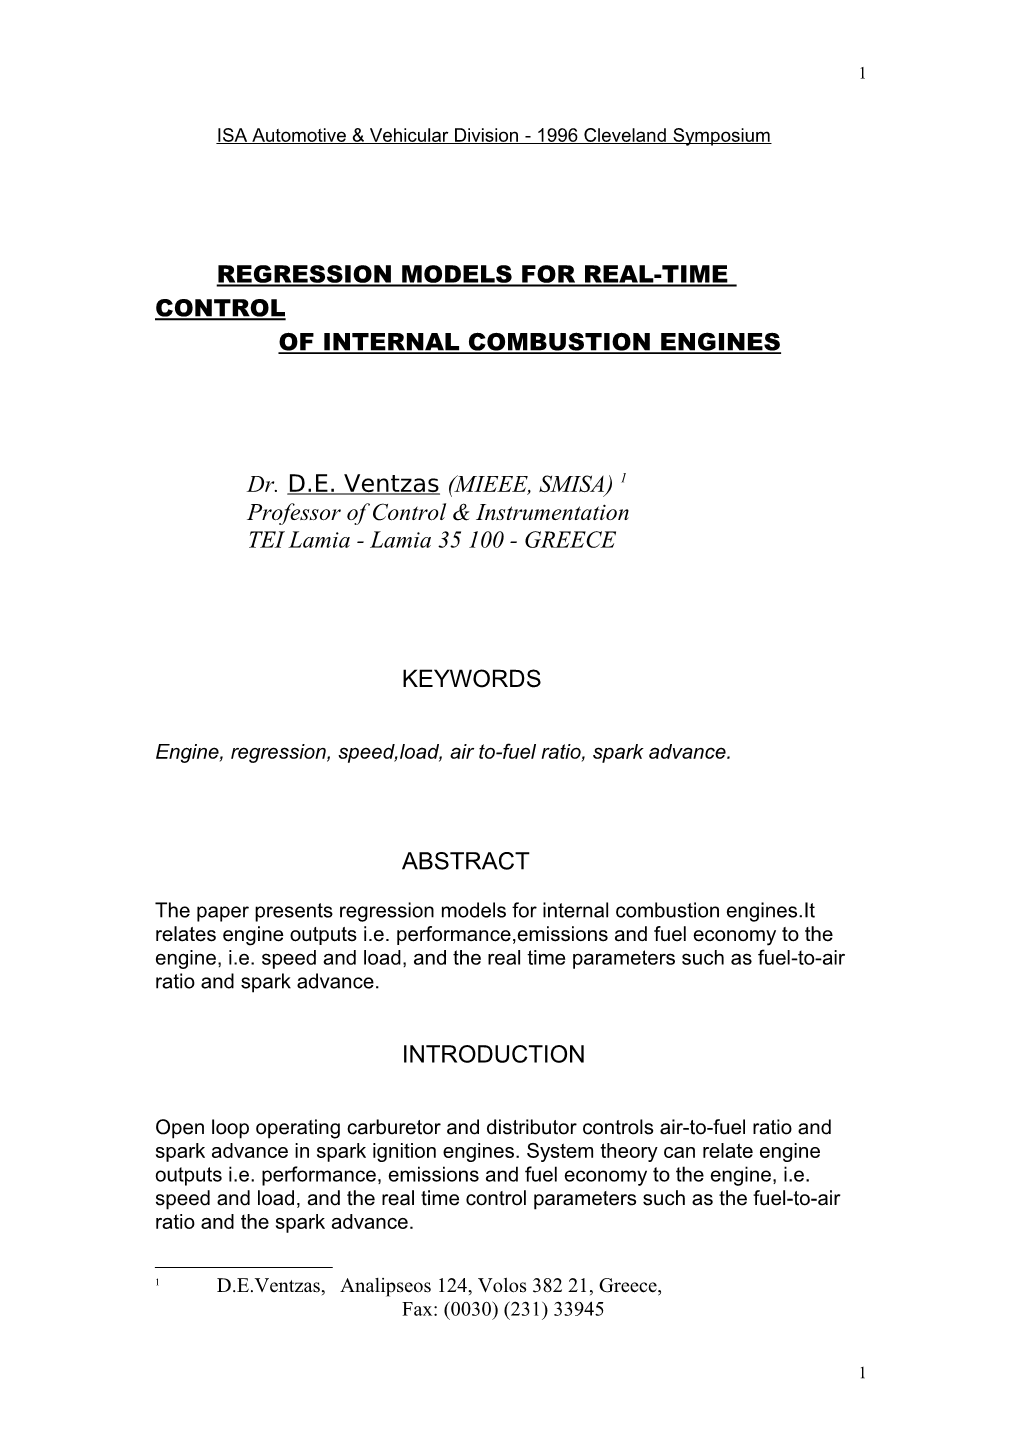 Regression Models for Real-Time Control